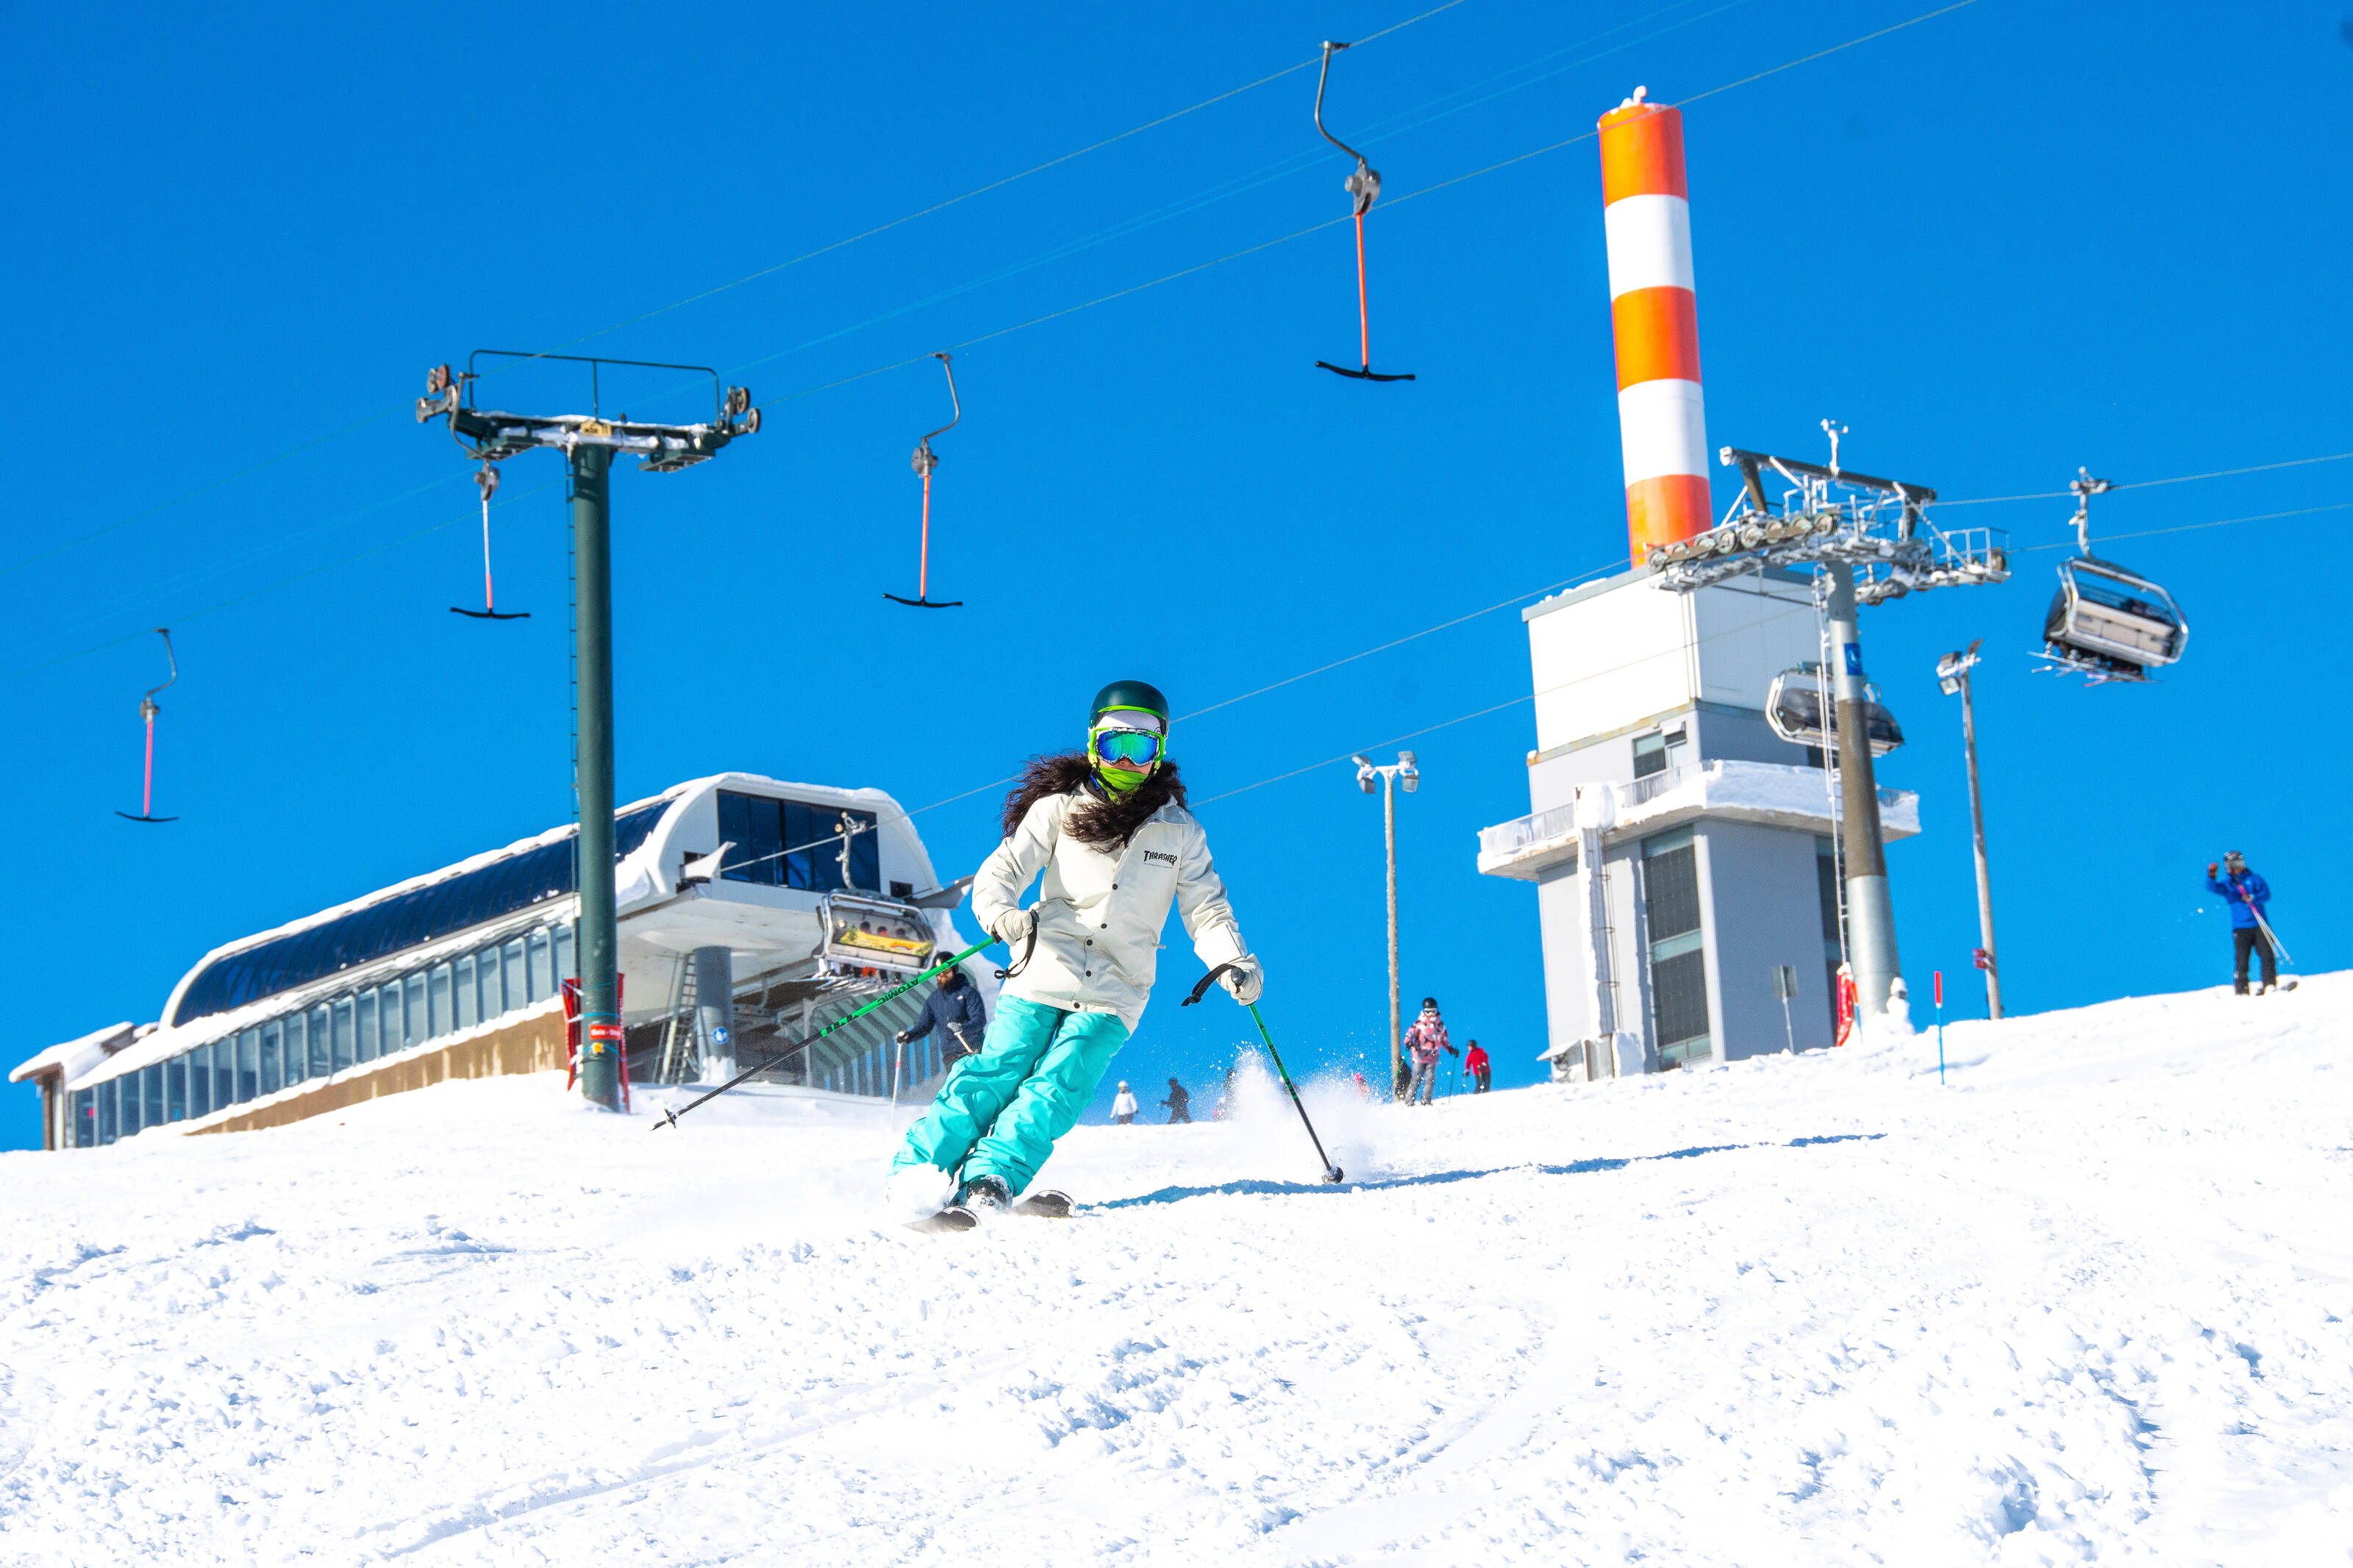 Spring skiinging in a snow-covered and sunny Ruka ski resort.